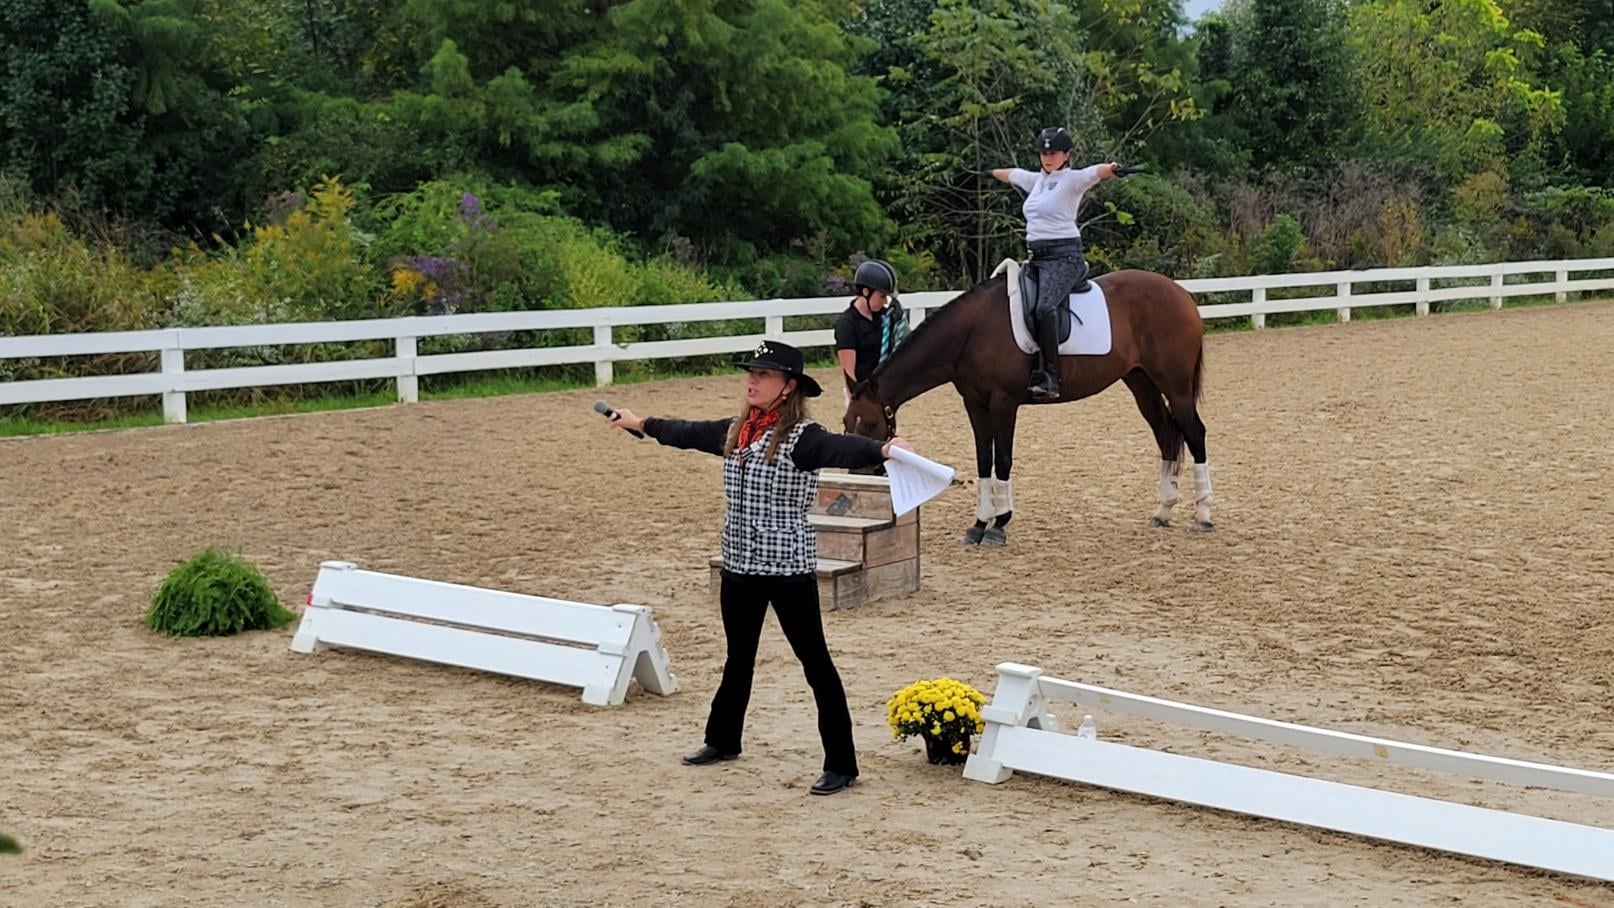 Cathy Woods demonstration at Equitana 2021